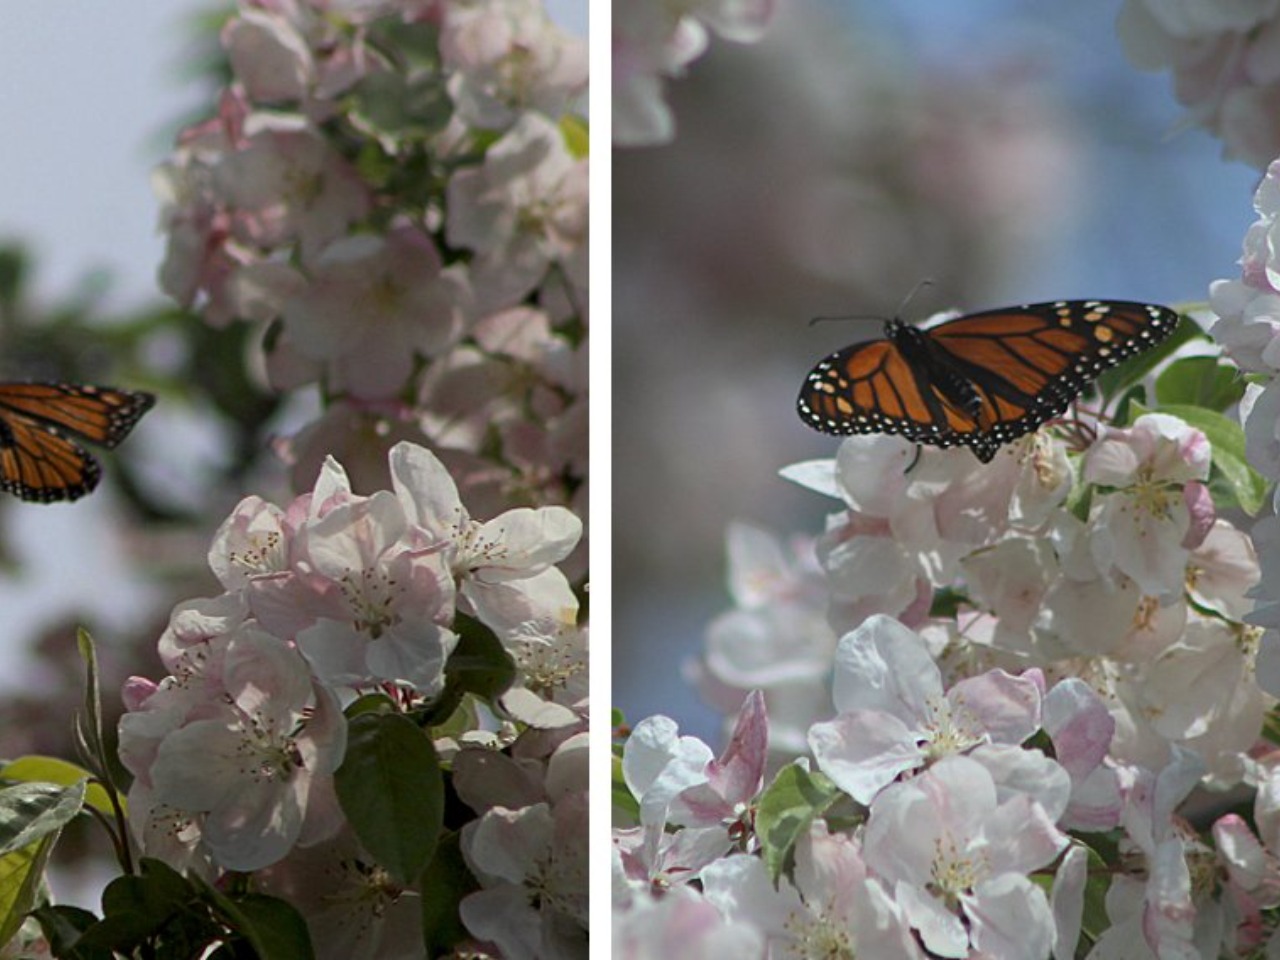 Two side-by-side photos of monarch butterflies on apple blossom flowers